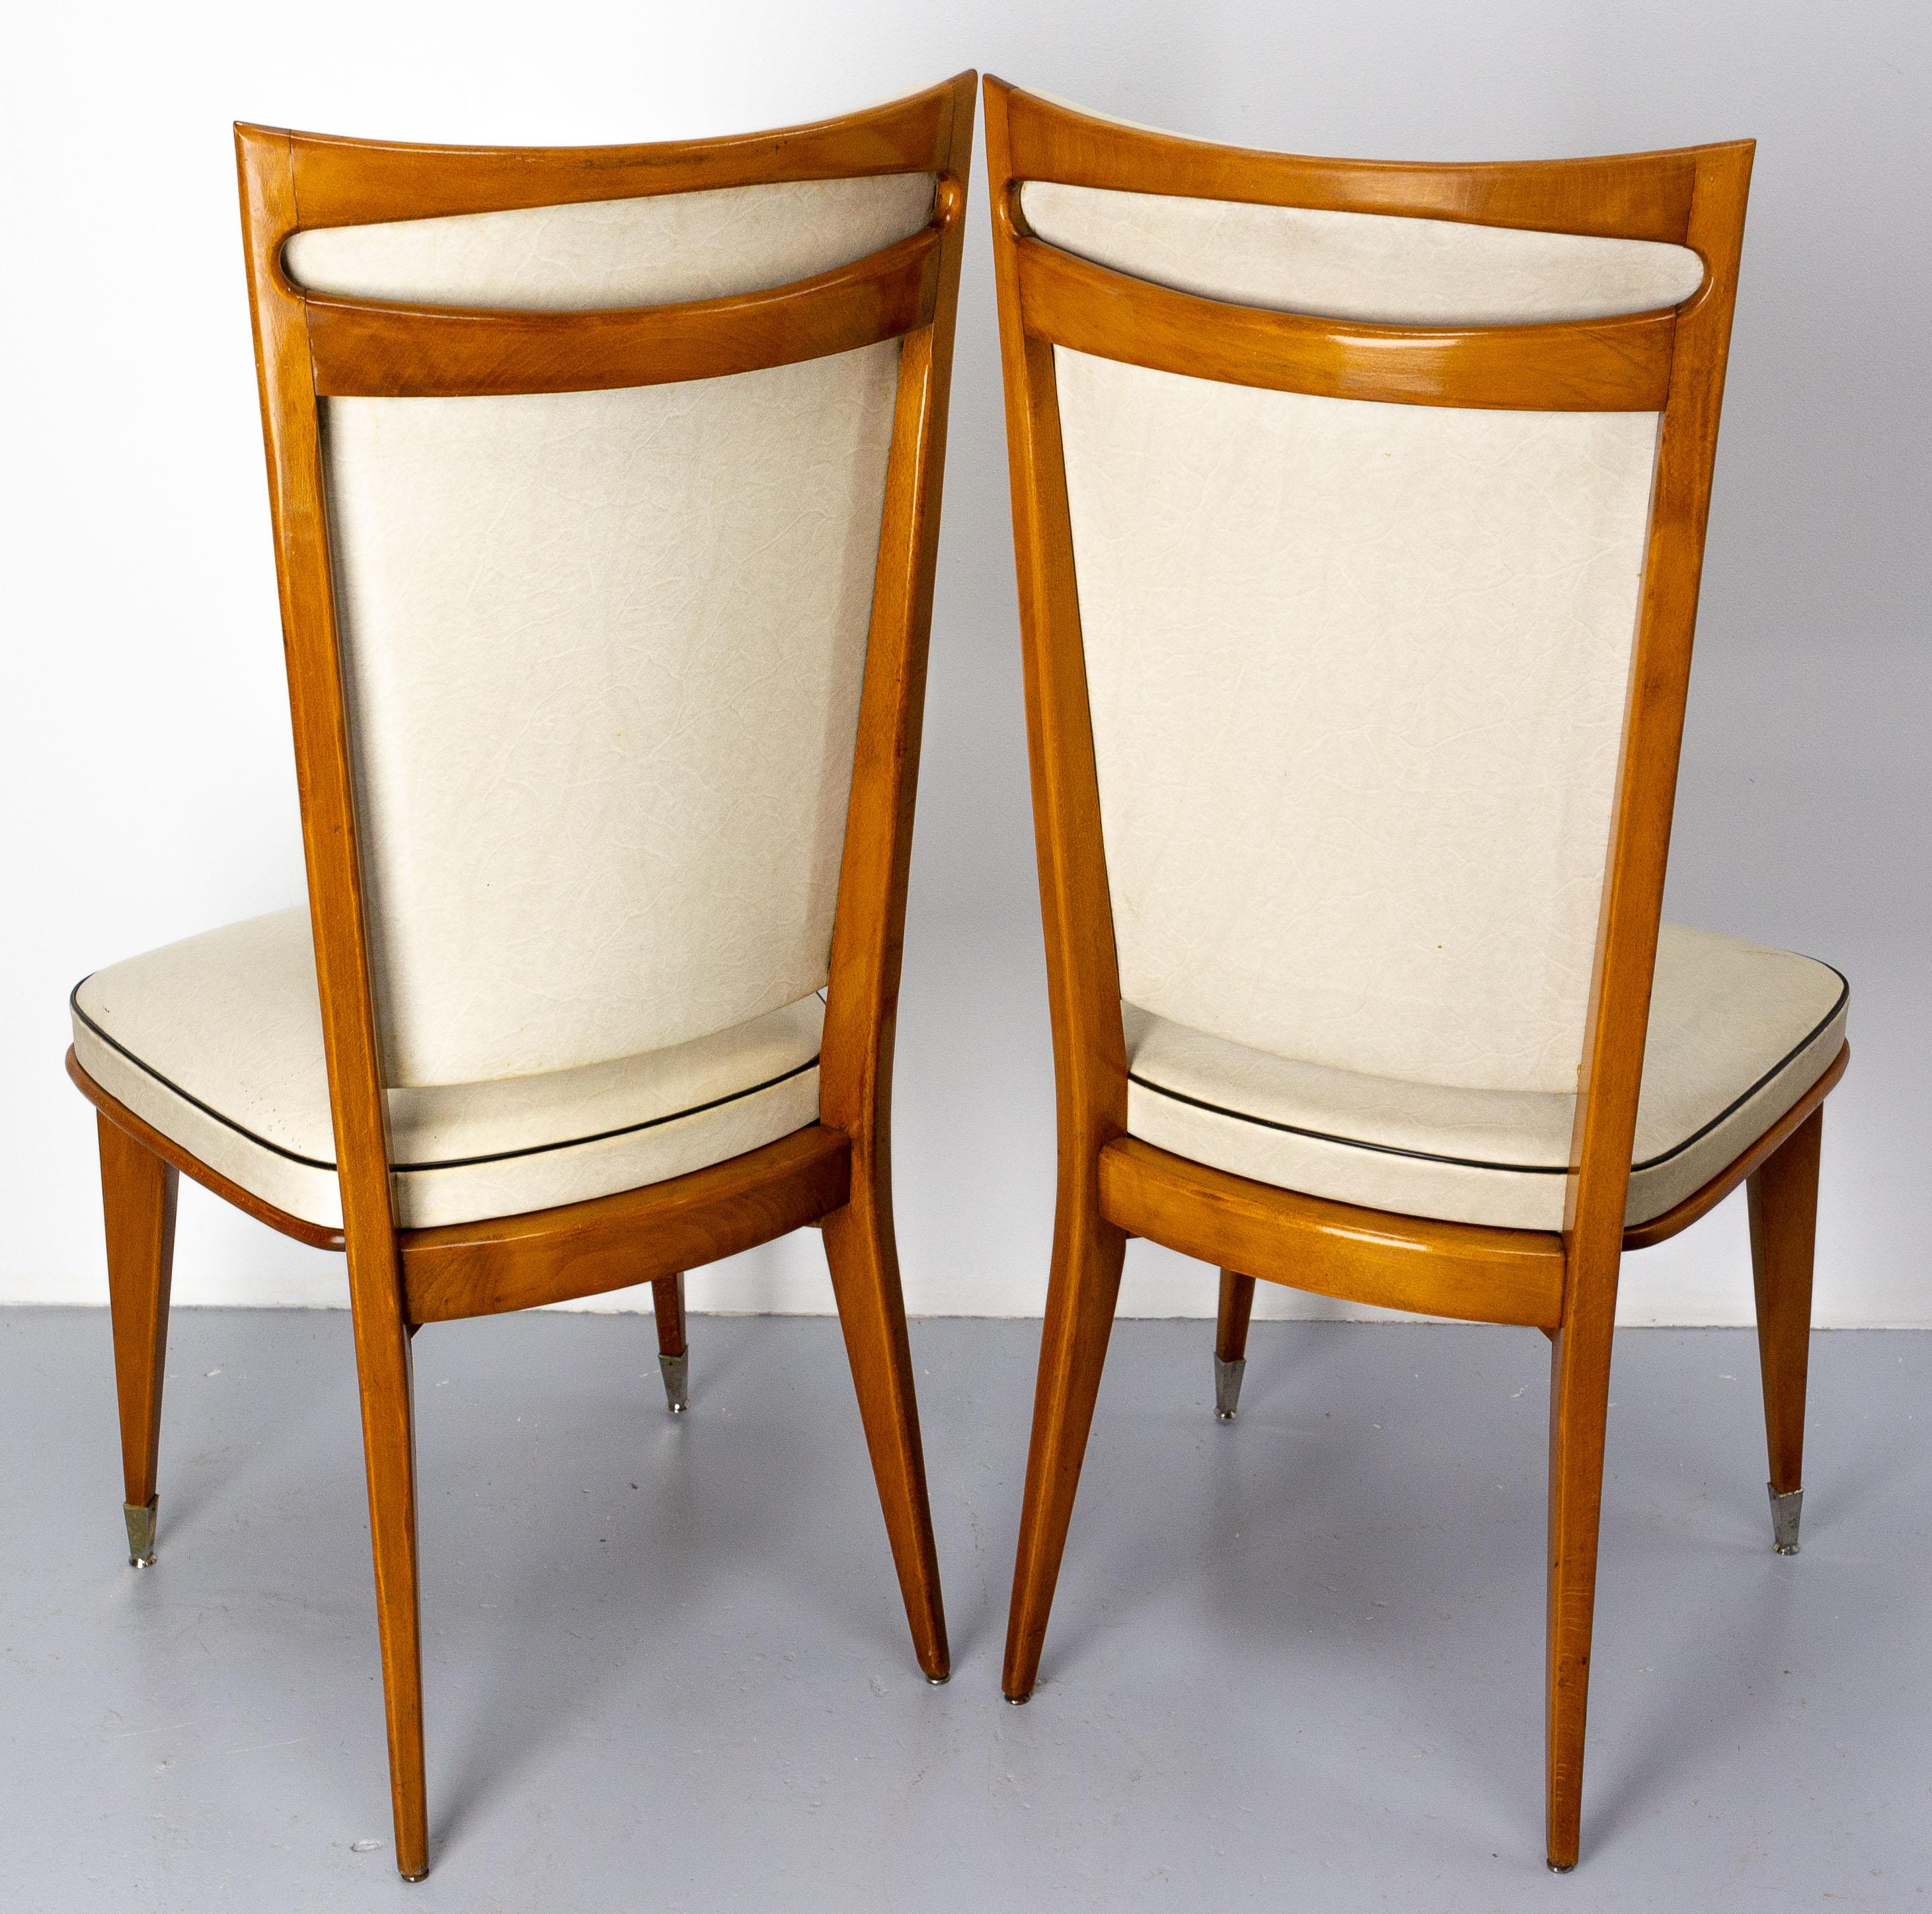 Six Dining Chairs Beech and Skai to Recover Midcentury French, circa 1950 For Sale 4